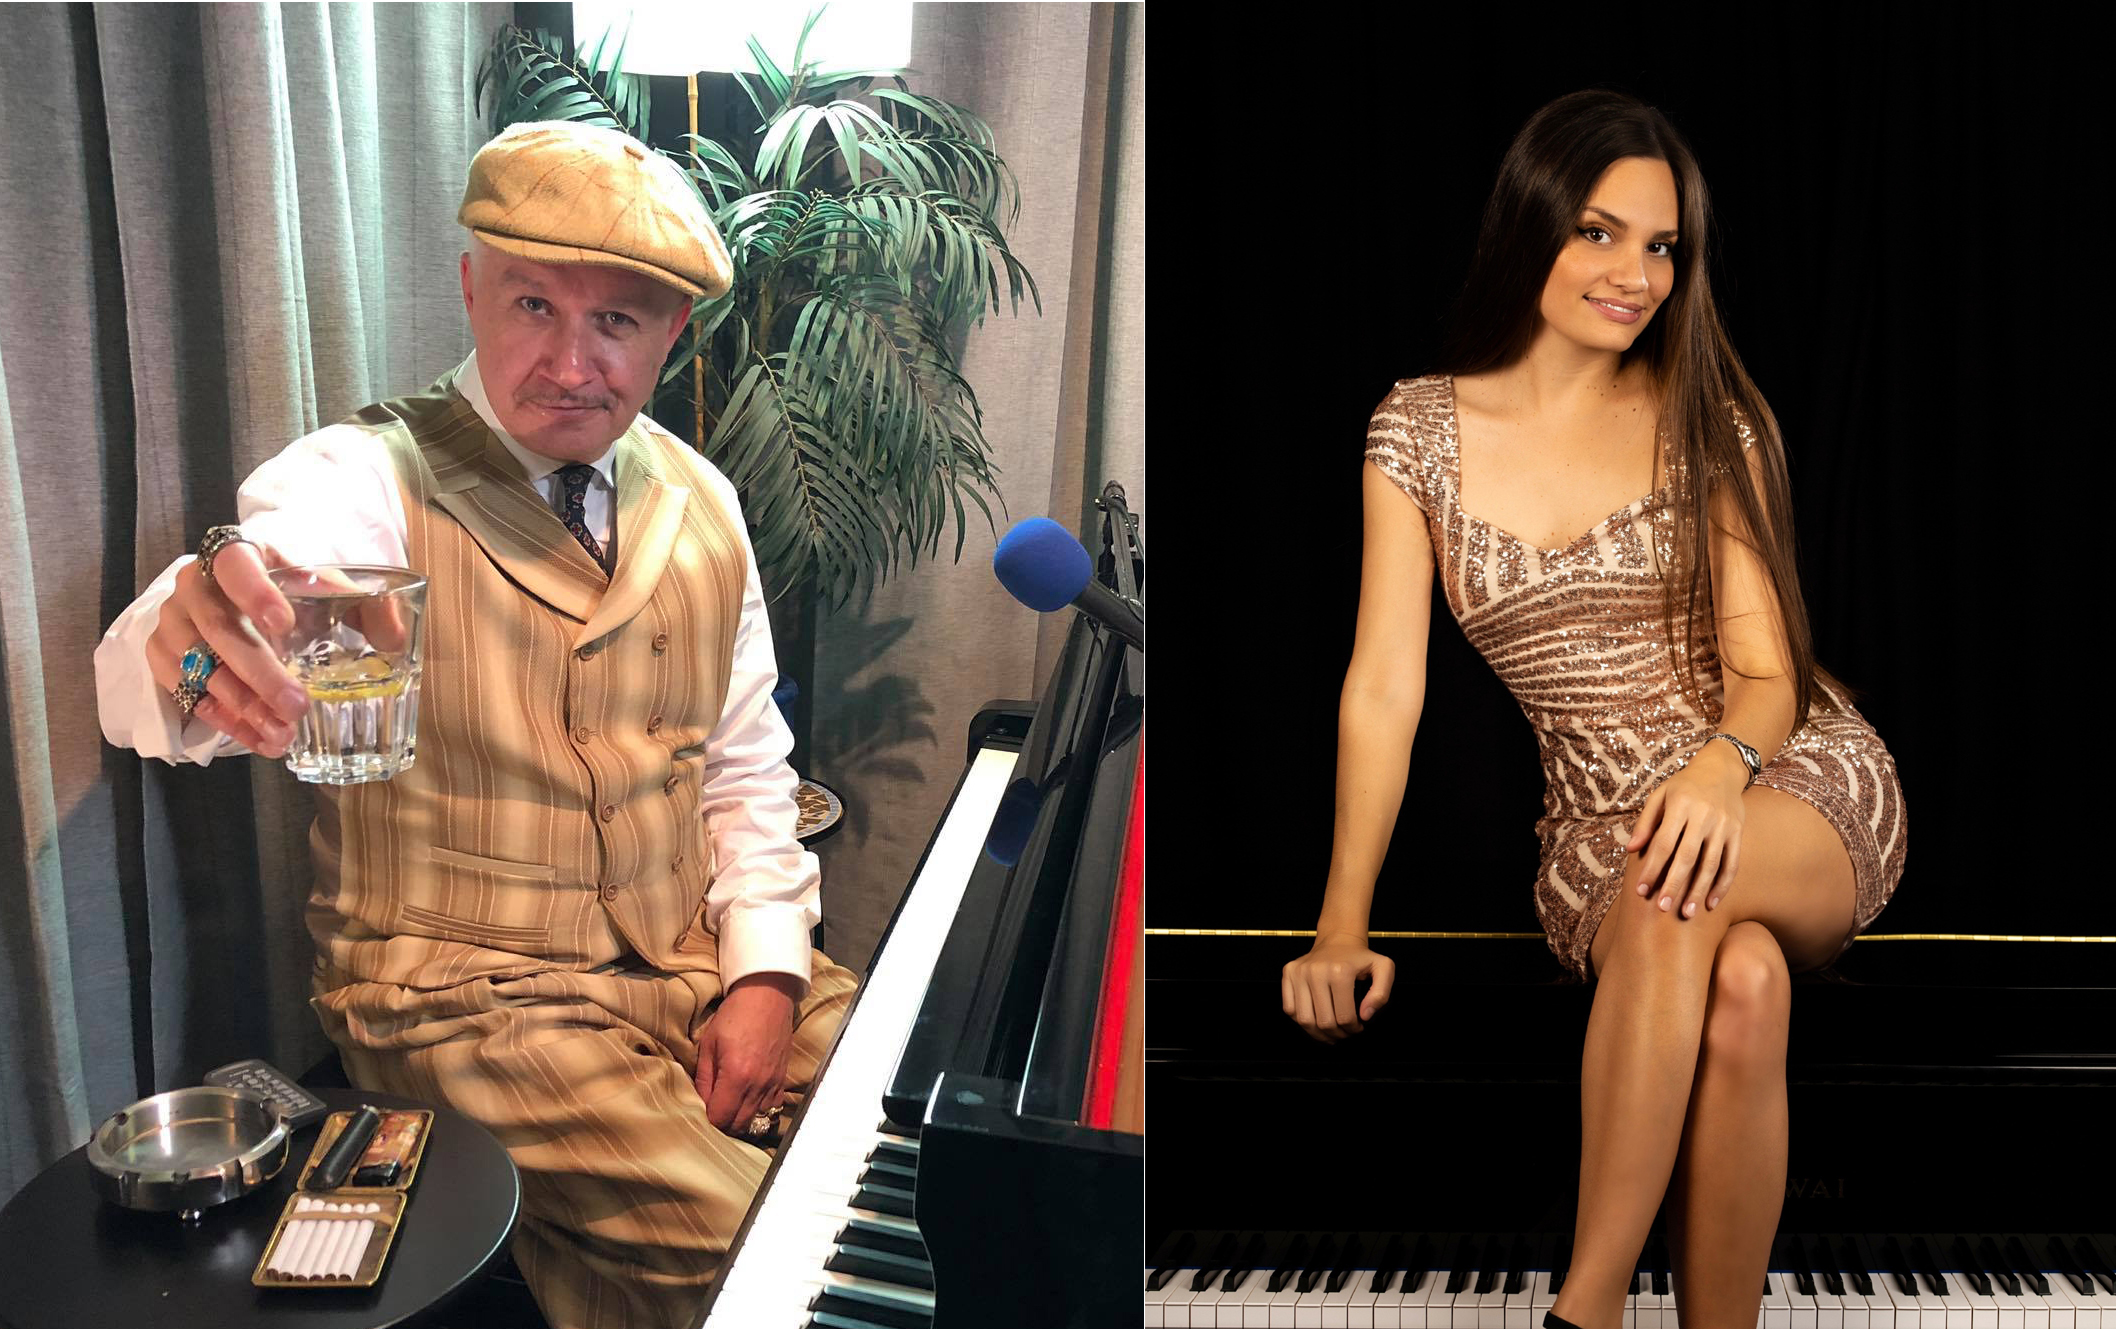 Two photographs are shown side by side. On the left-hand side, Christian Christl can be seen wearing a waistcoat and peaked cap, sitting at the piano and toasting the camera with a glass in his hand. On the right-hand side you can see pianist Vanessa Gnägi sitting on a piano in a cocktail dress.